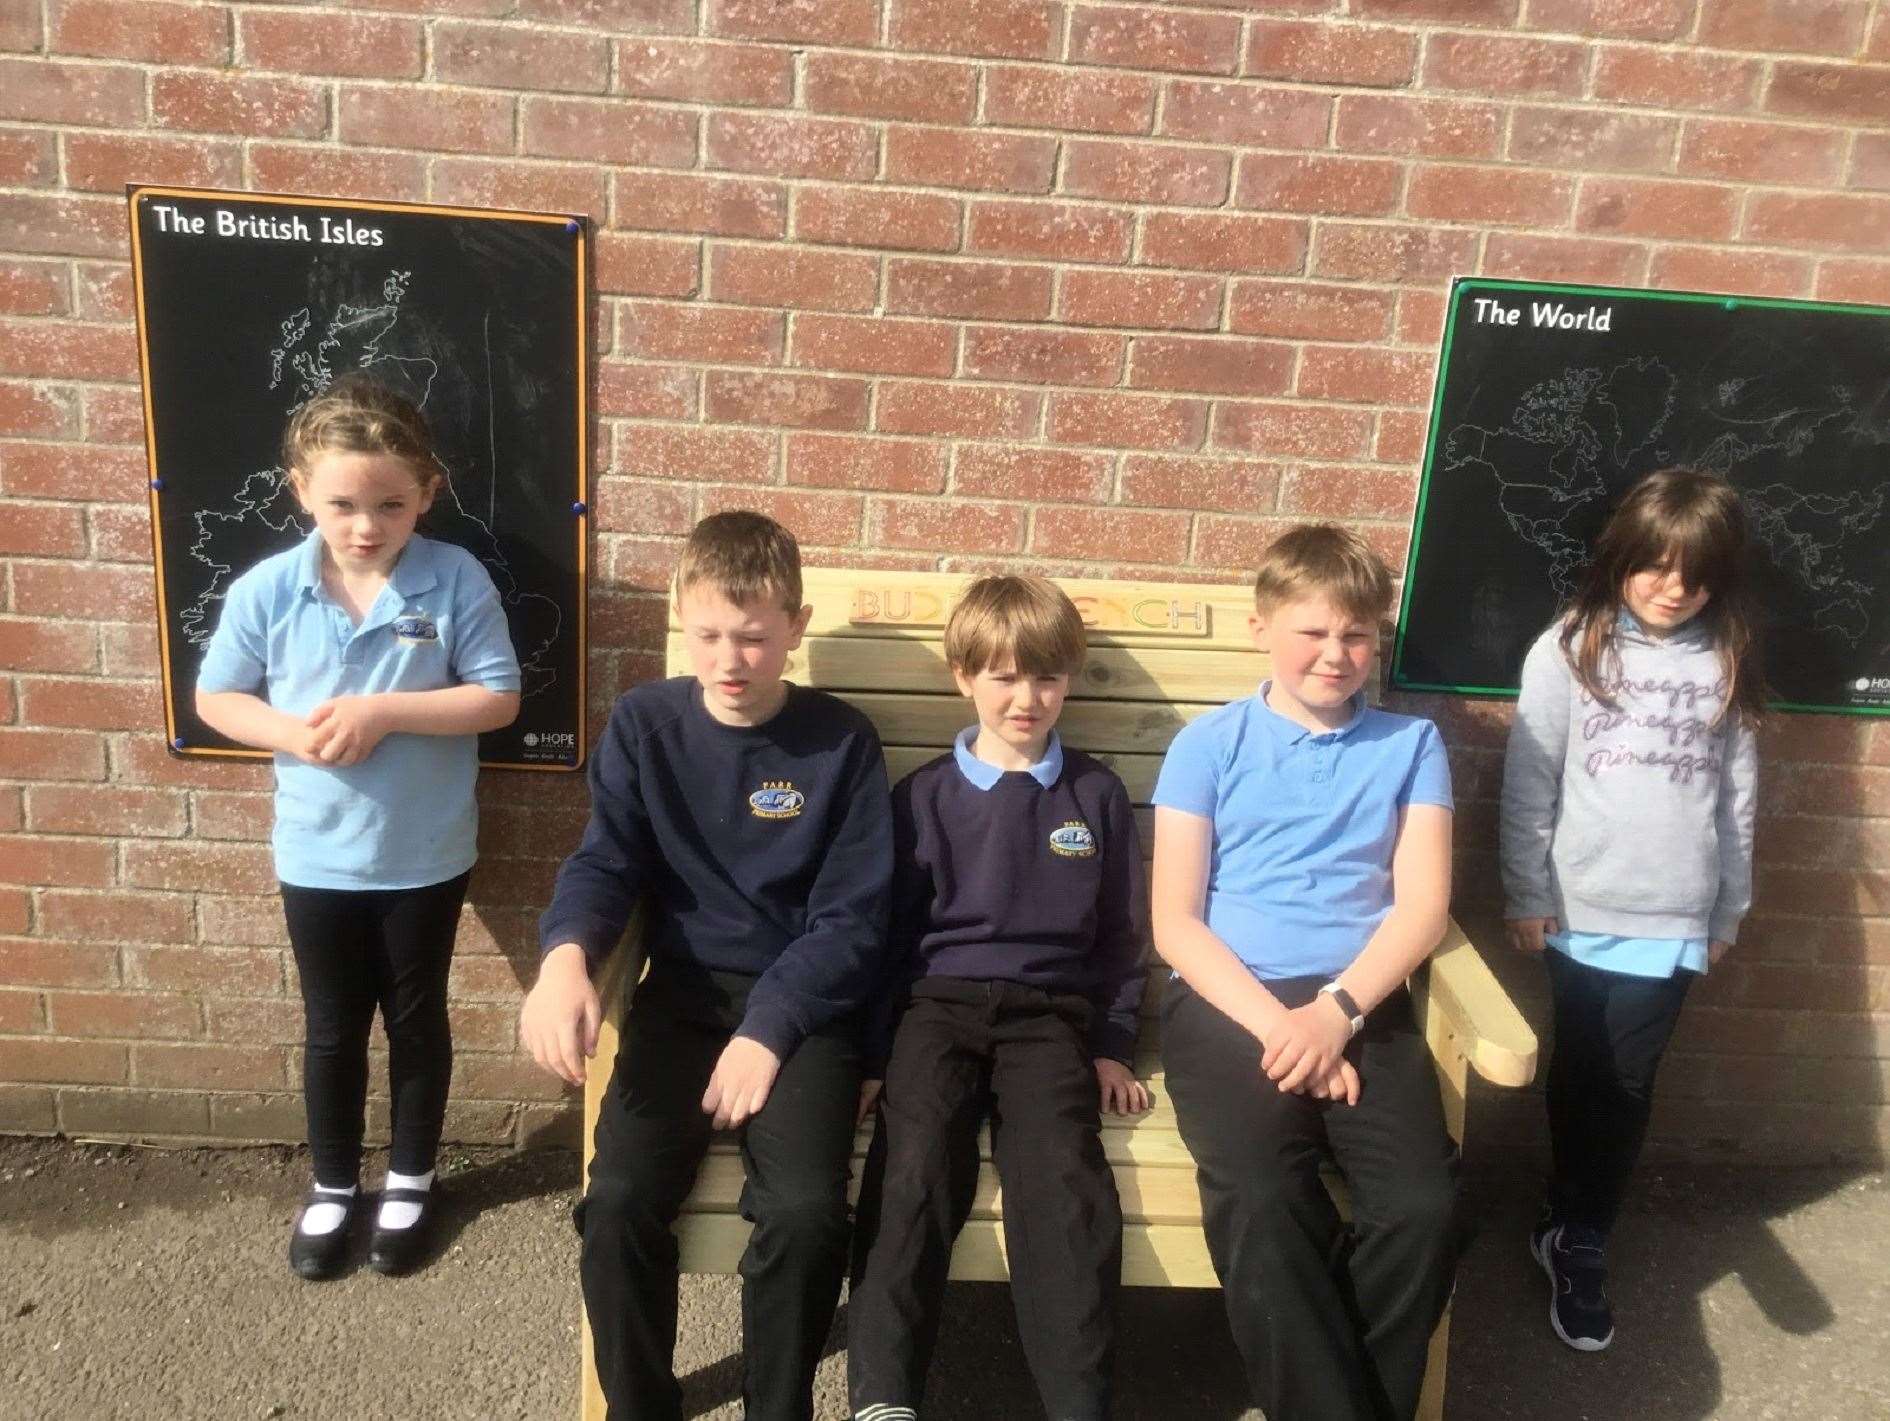 Pupil Council members Paige Mackay, Fraser Drennan, Angelo Munro, Arran Wright and Isla Bruce. Missing from the picture are Michael Wright and Nathan Solomon.